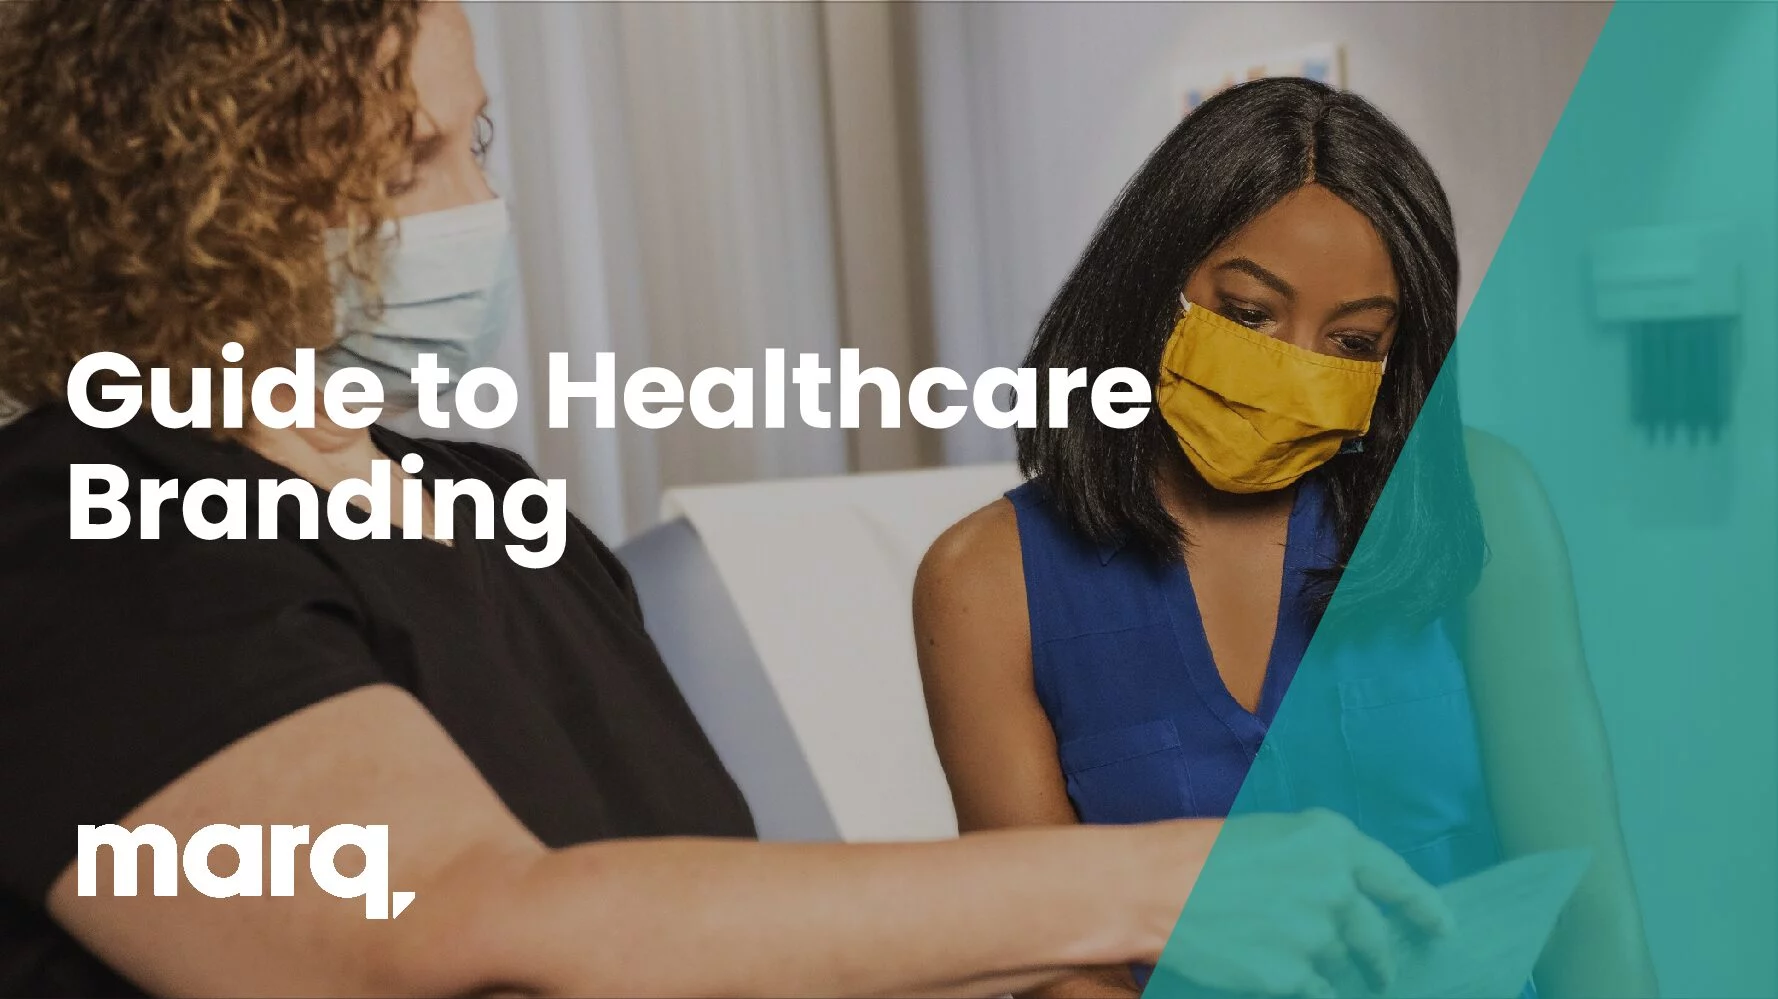 Guide to healthcare branding